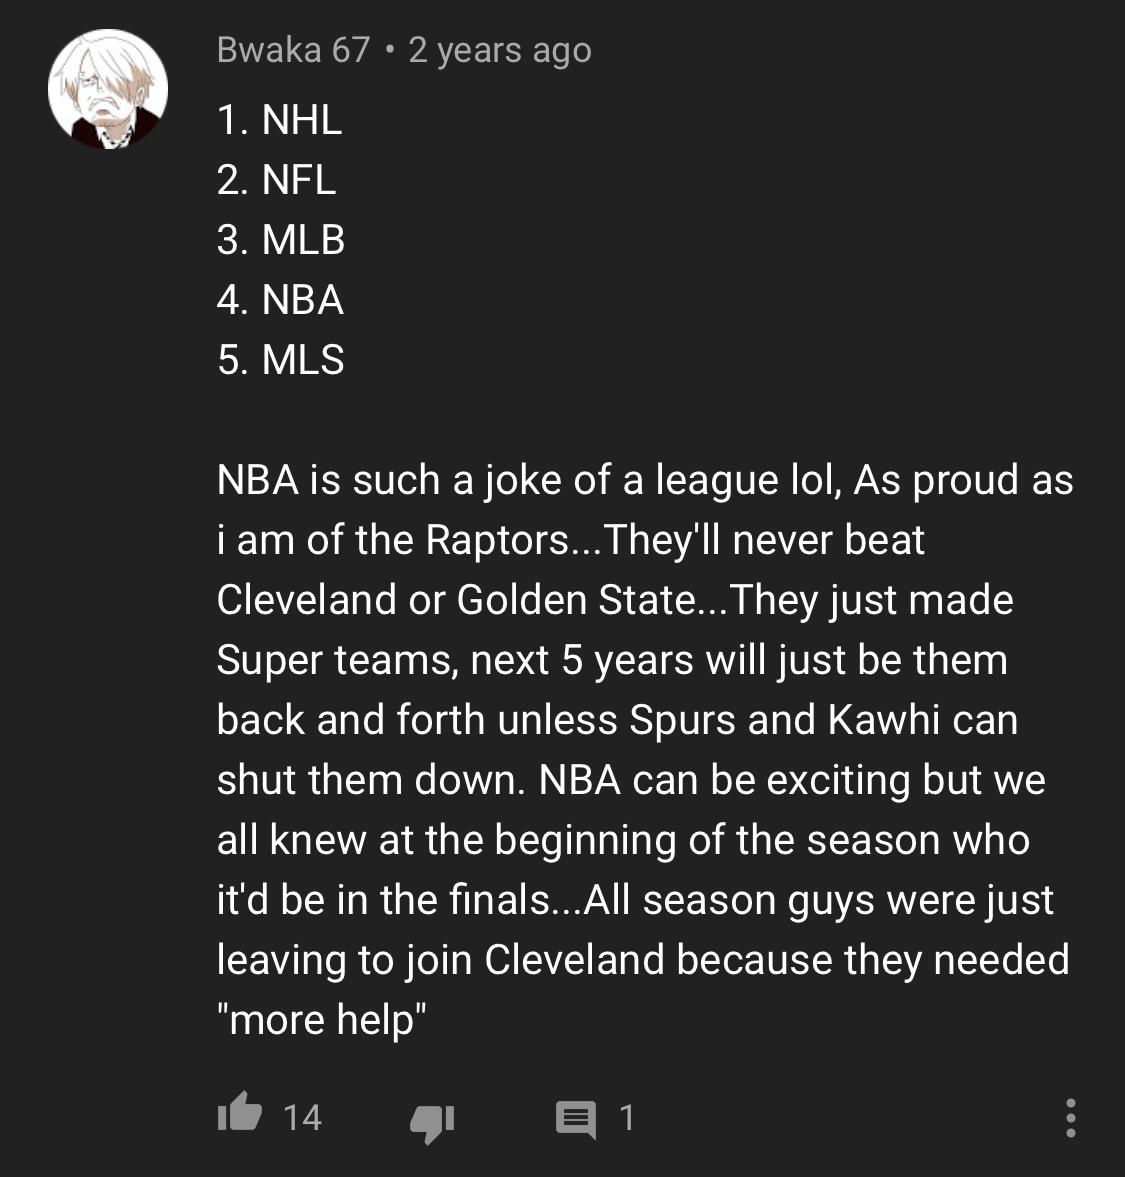 screenshot - Bwaka 67 2 years ago 1. Nhl 2. Nfl 3. Mlb 4. Nba 5. Mls Nba is such a joke of a league lol, As proud as i am of the Raptors... They'll never beat Cleveland or Golden State... They just made Super teams, next 5 years will just be them back and